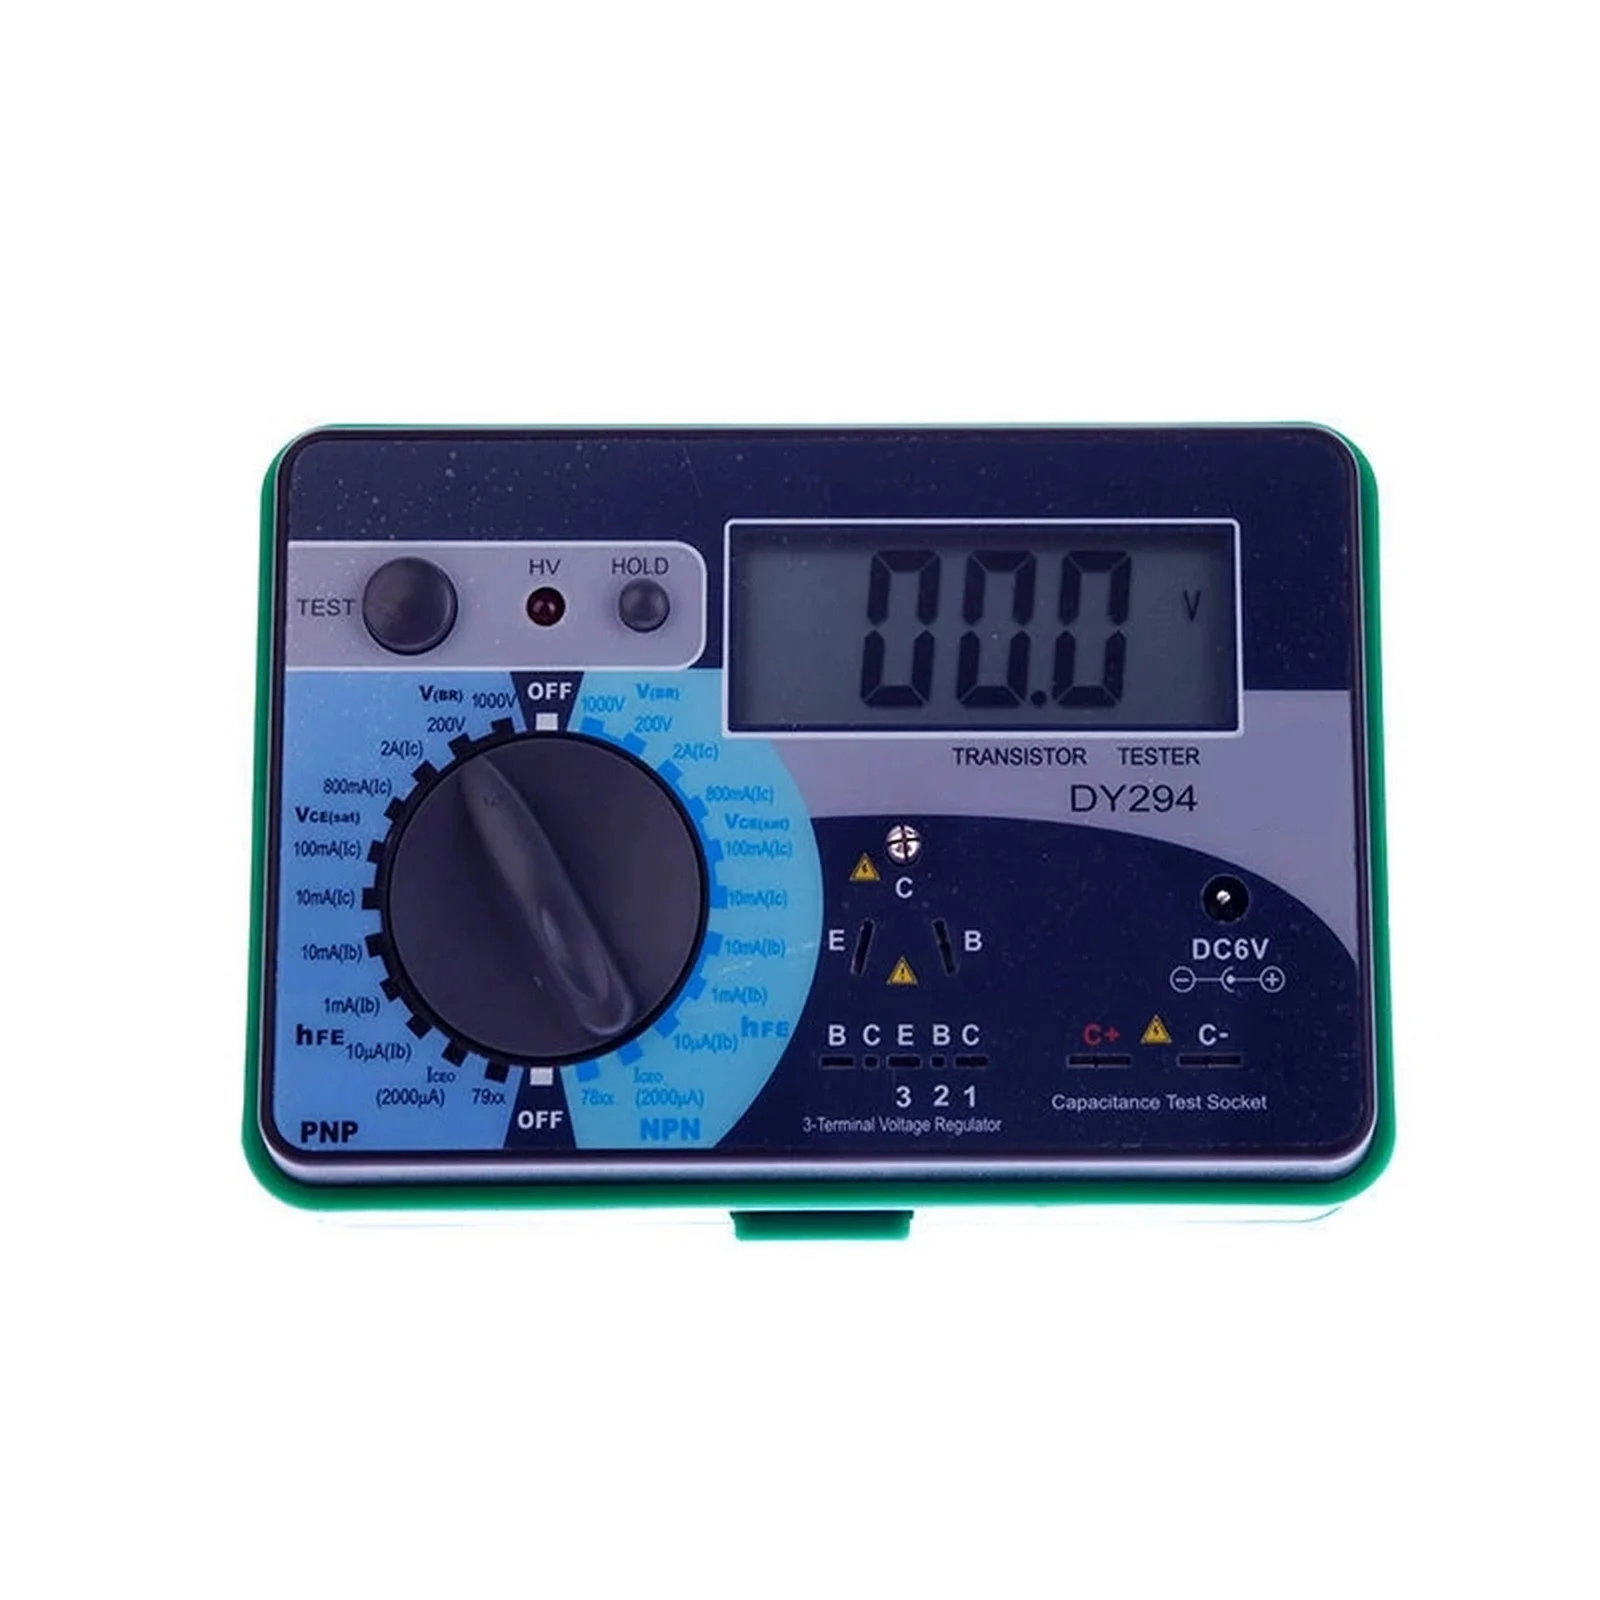 DY294 Multifunction Digital Transistor Analyzer Tester Semiconductor Diode Triode Reverse AC DC Voltage Capacitance FET